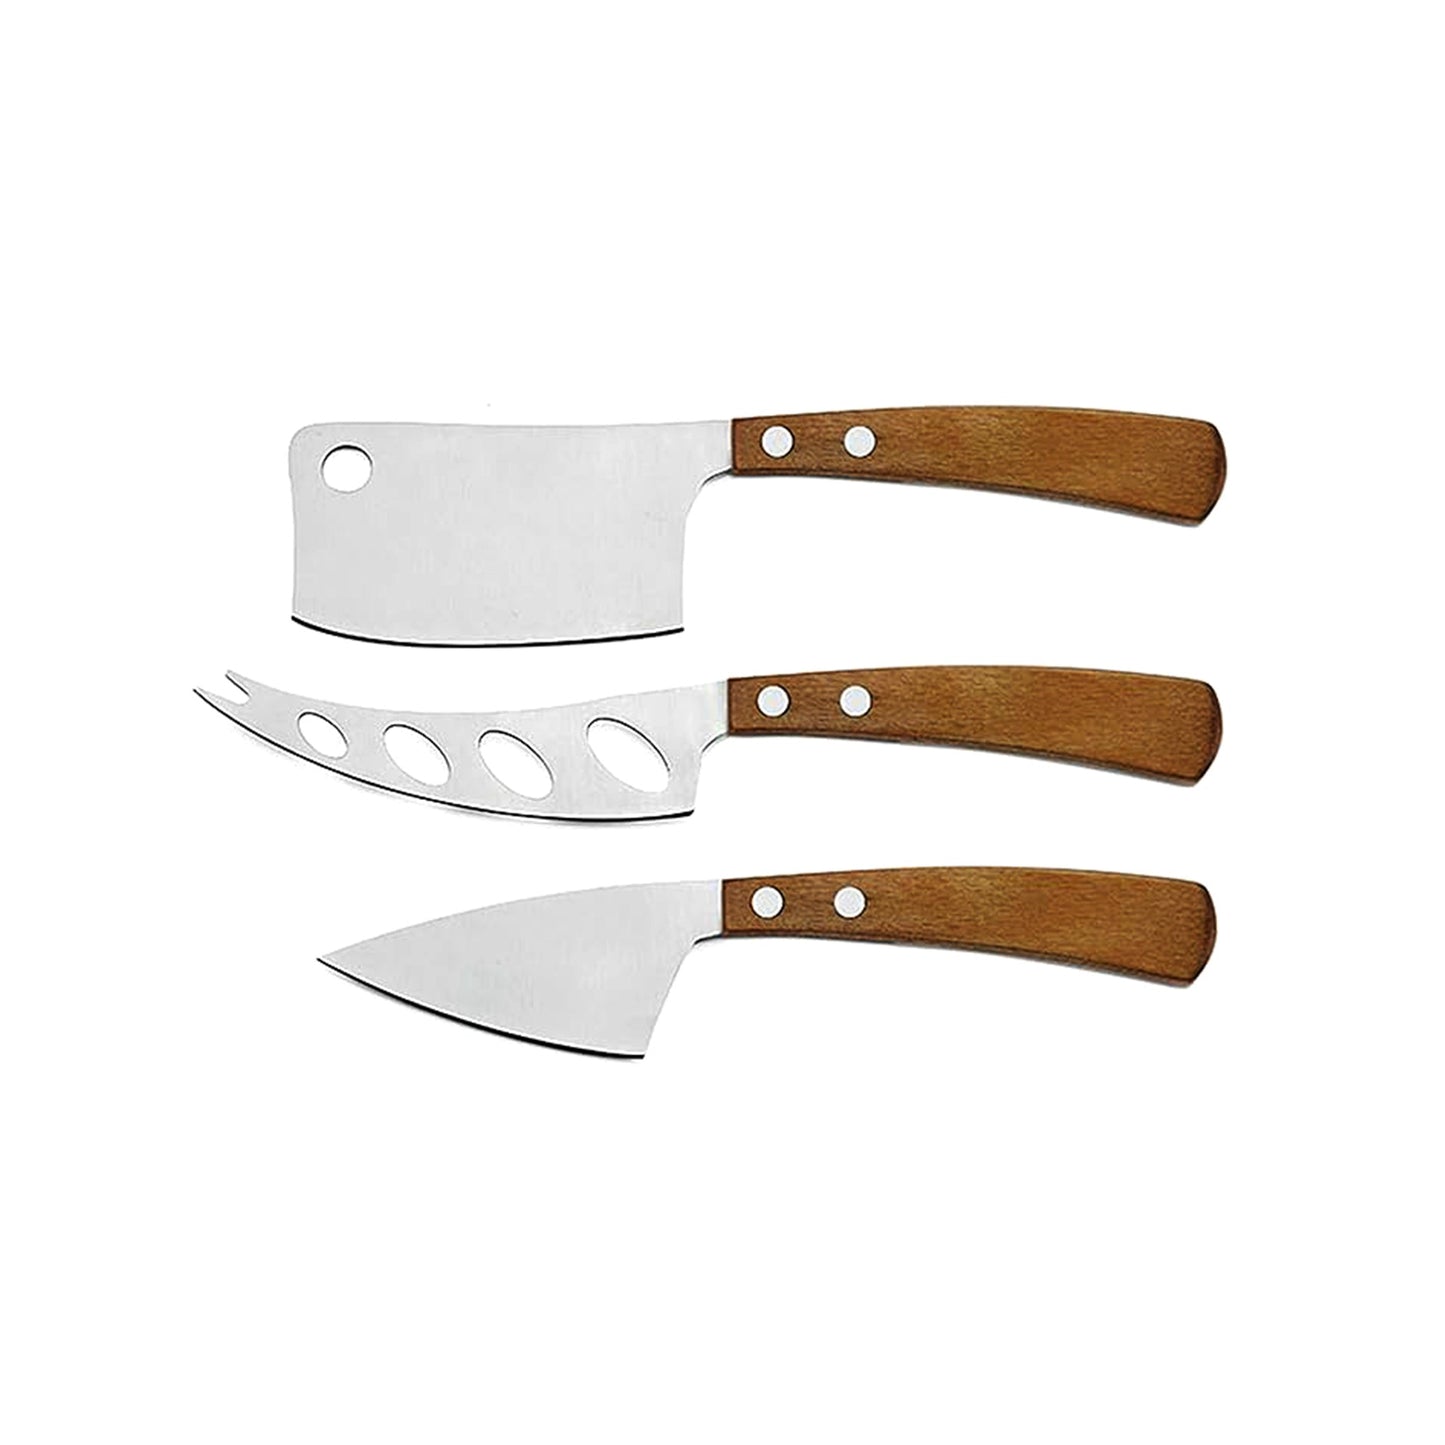 3-Piece Cheese Knife Set with Wooden Handles by Creative Gifts